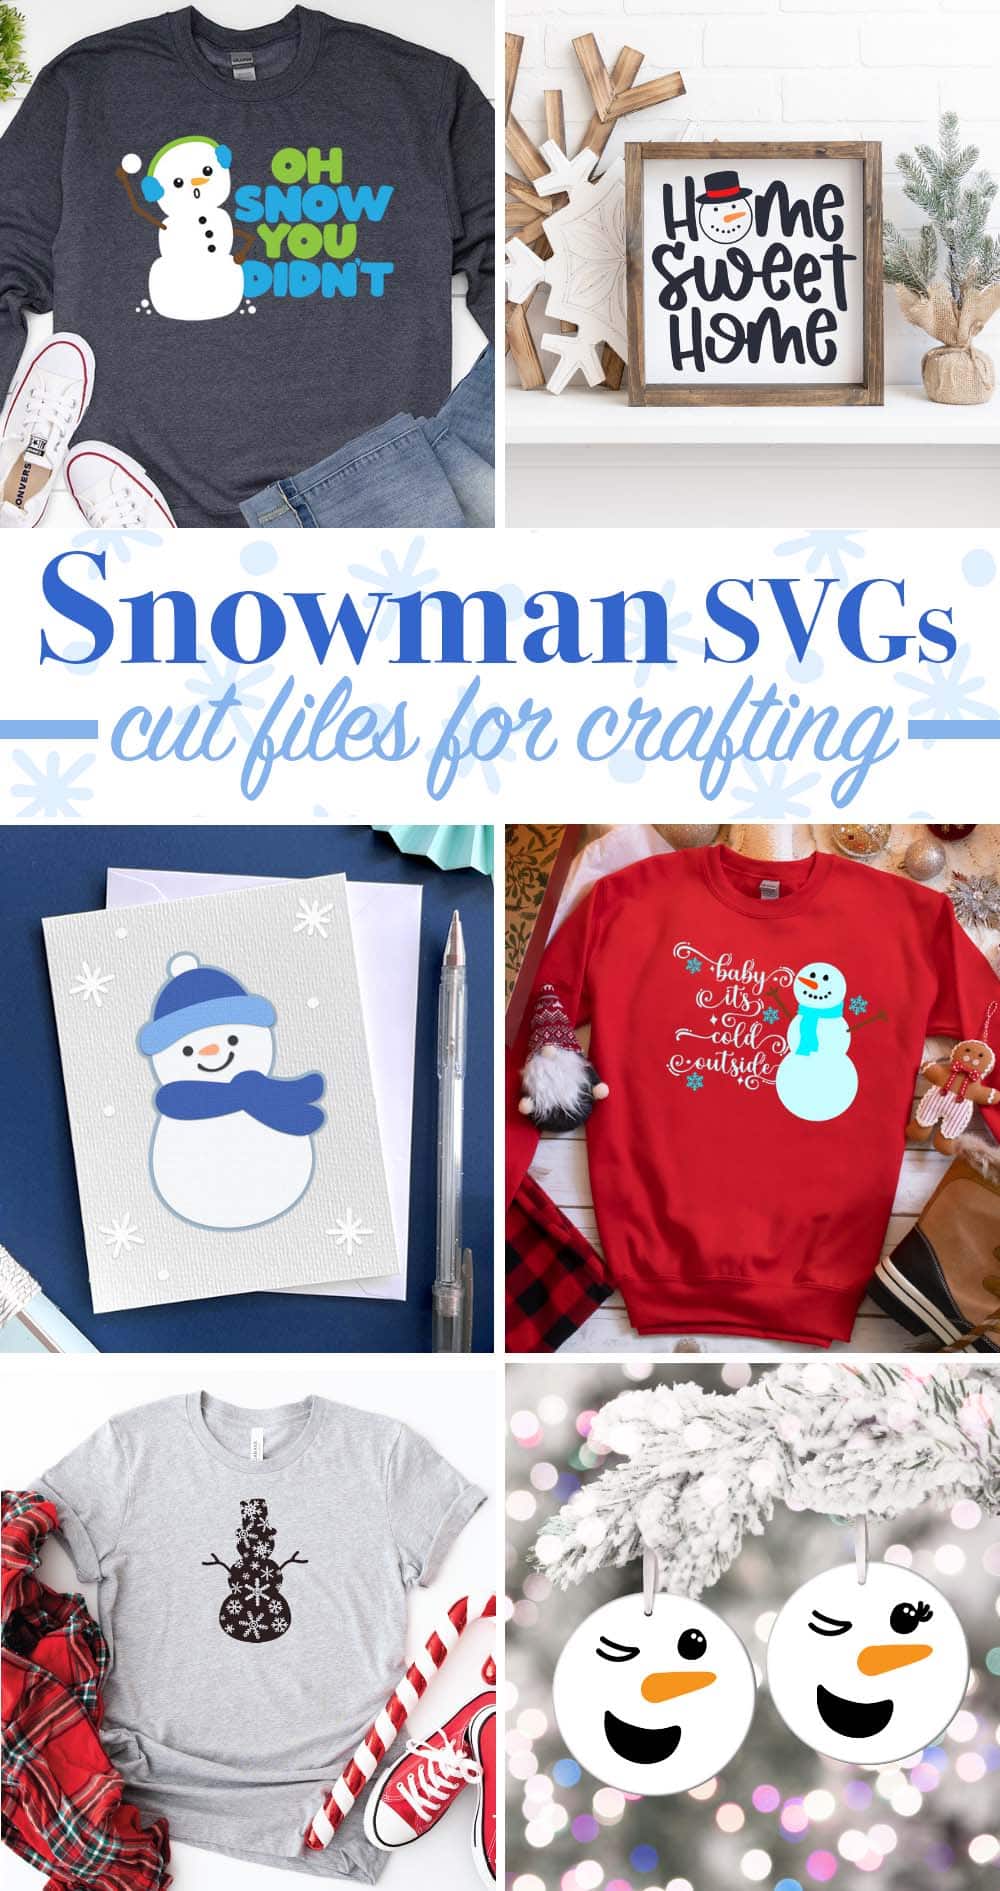 Snowman SVG - Cut Files for craft